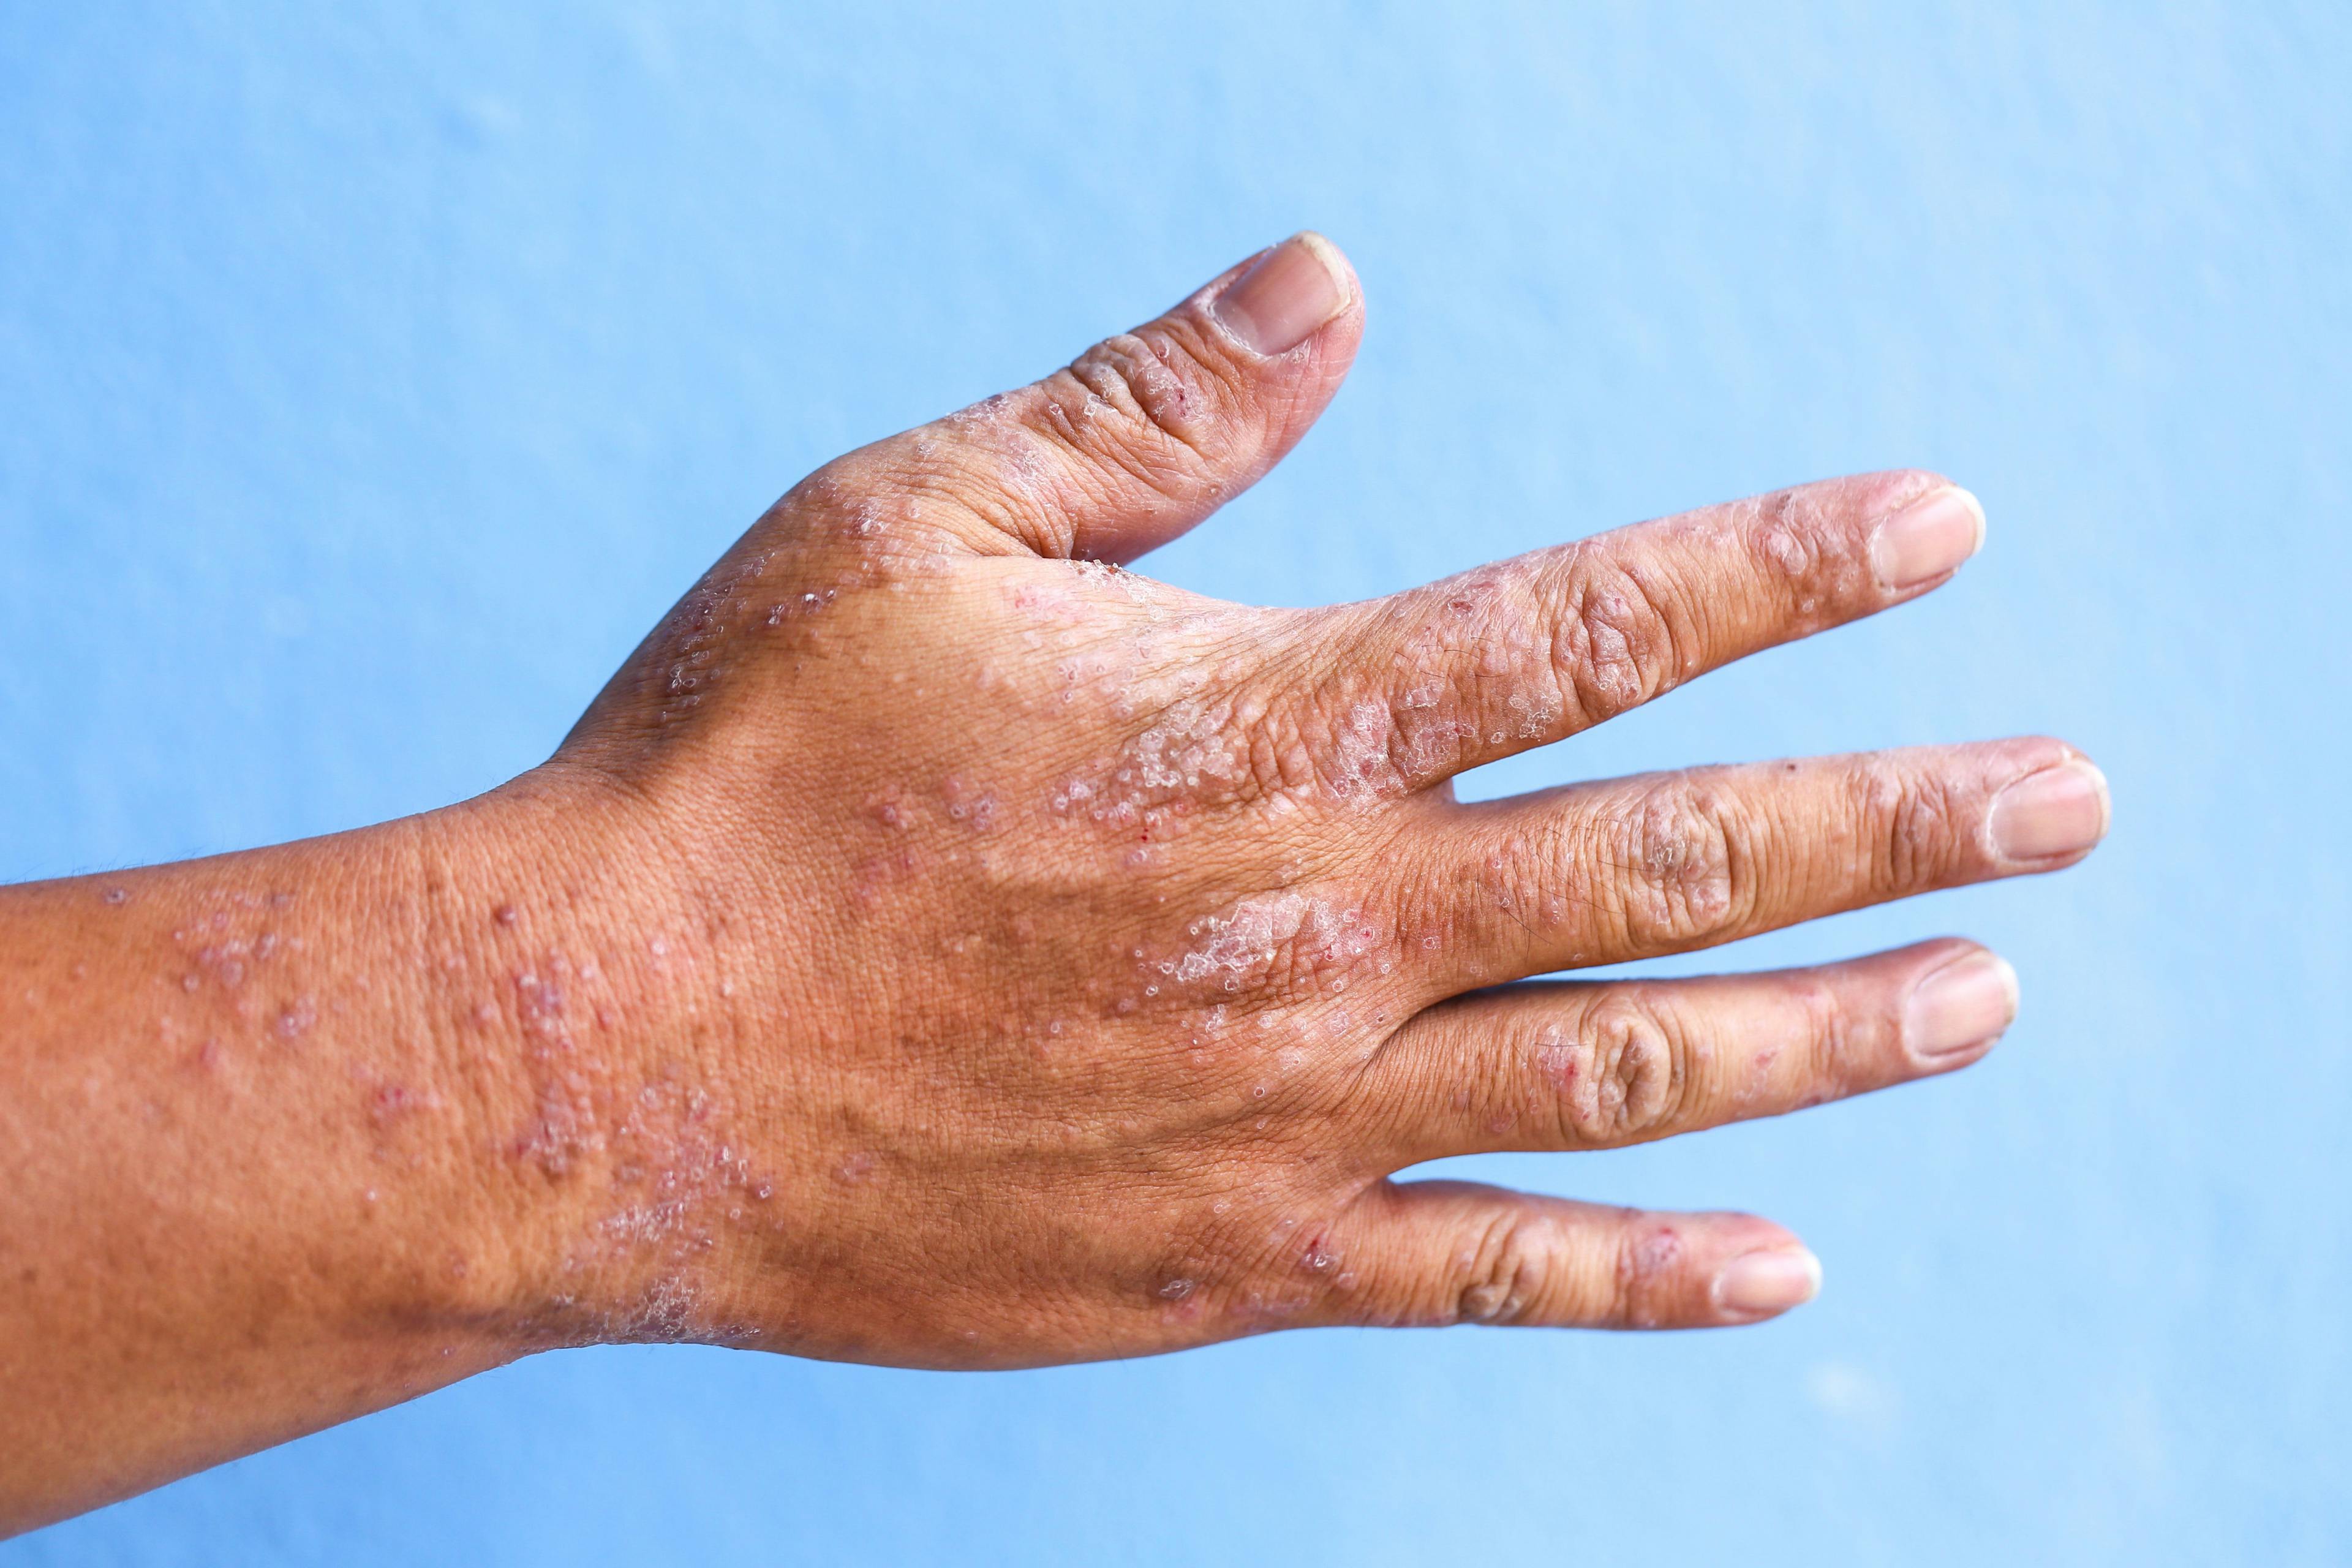 South Korea Study Delves Into Safety Insights for JAK Inhibitors for Atopic Dermatitis